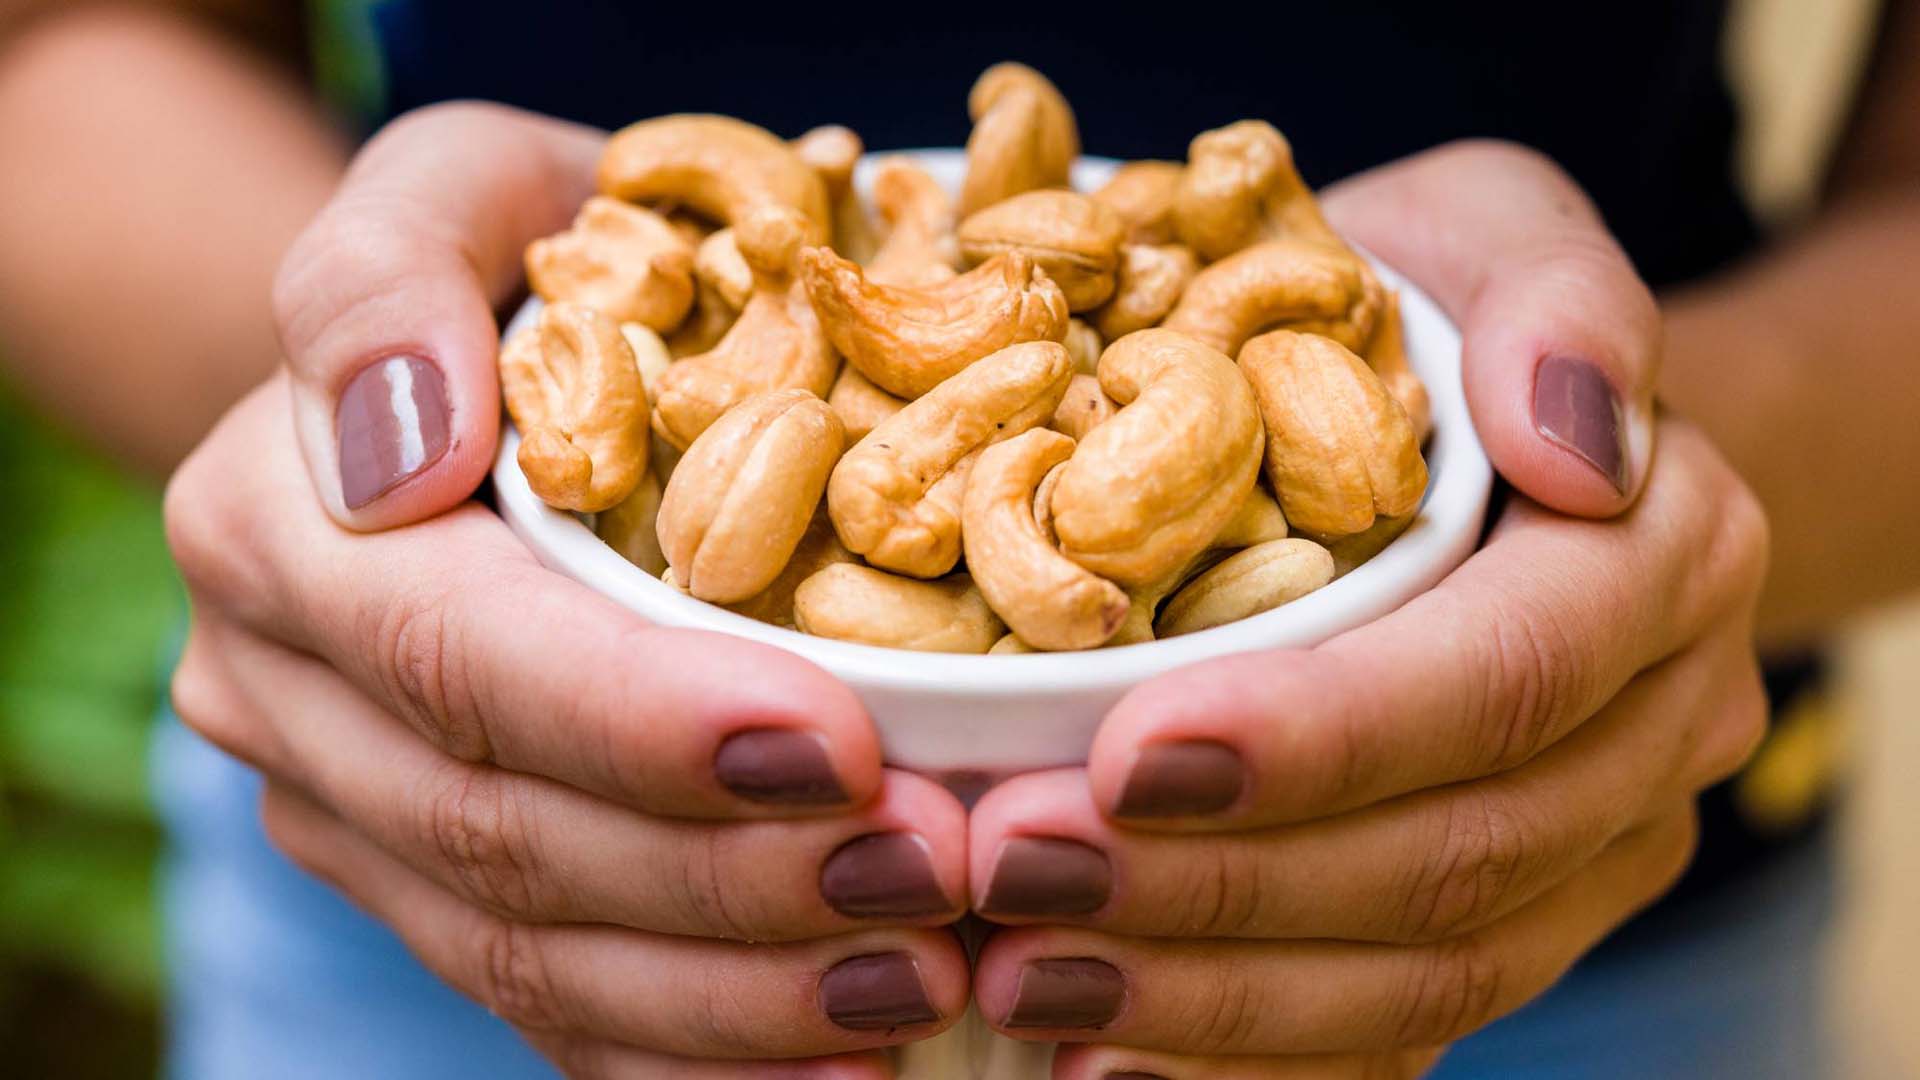 A woman holding a bowl of cashews in both hands